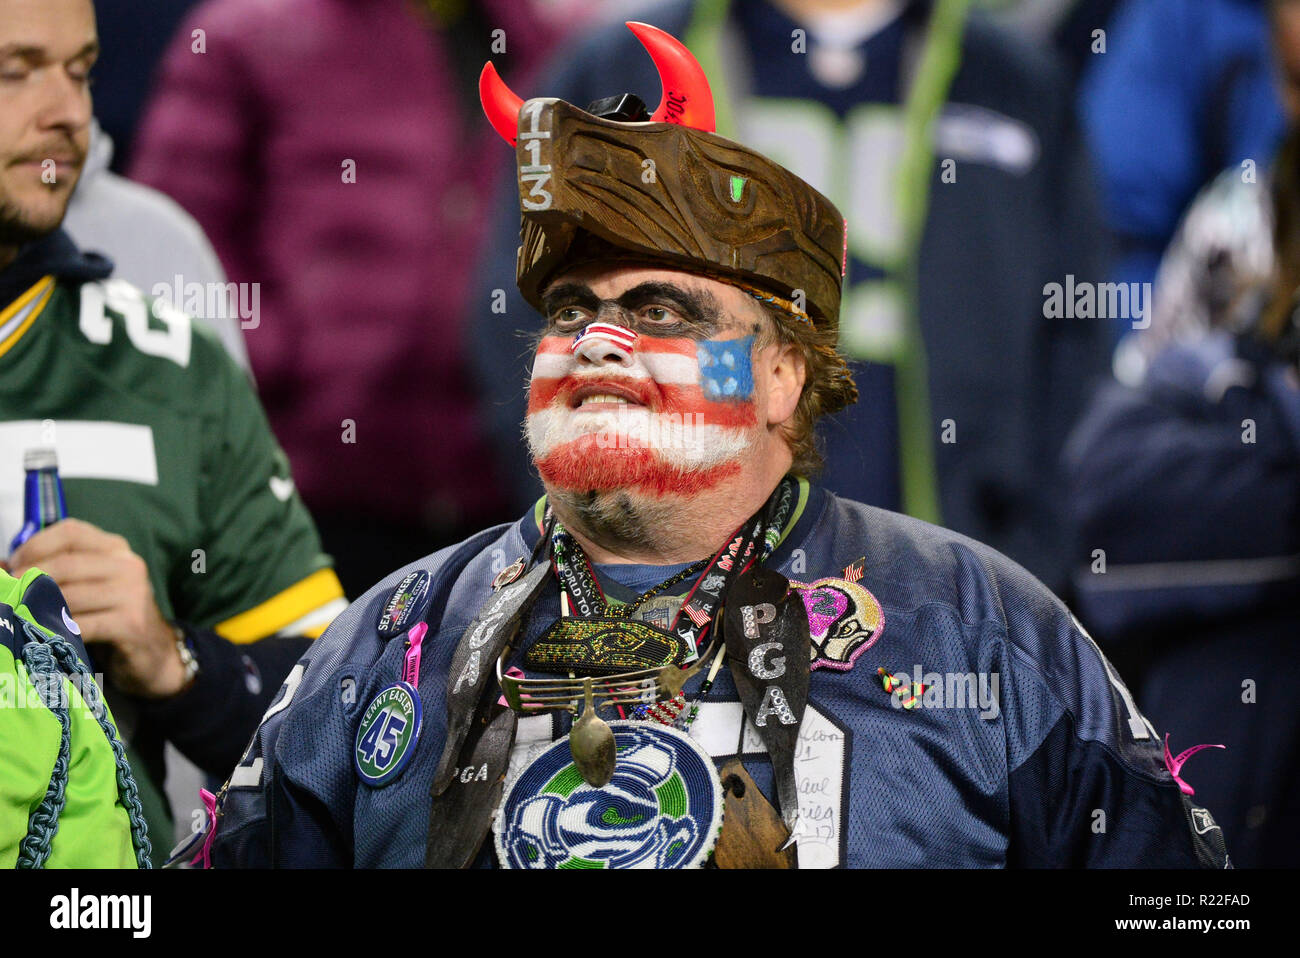 Seattle, Washington, USA. 15th Nov, 2018. A Seahawk fan looks on during an NFL game between the Seattle Seahawks and the Green Bay Packers. The game was played at Century Link Field in Seattle, WA. Credit: Jeff Halstead/ZUMA Wire/Alamy Live News Stock Photo